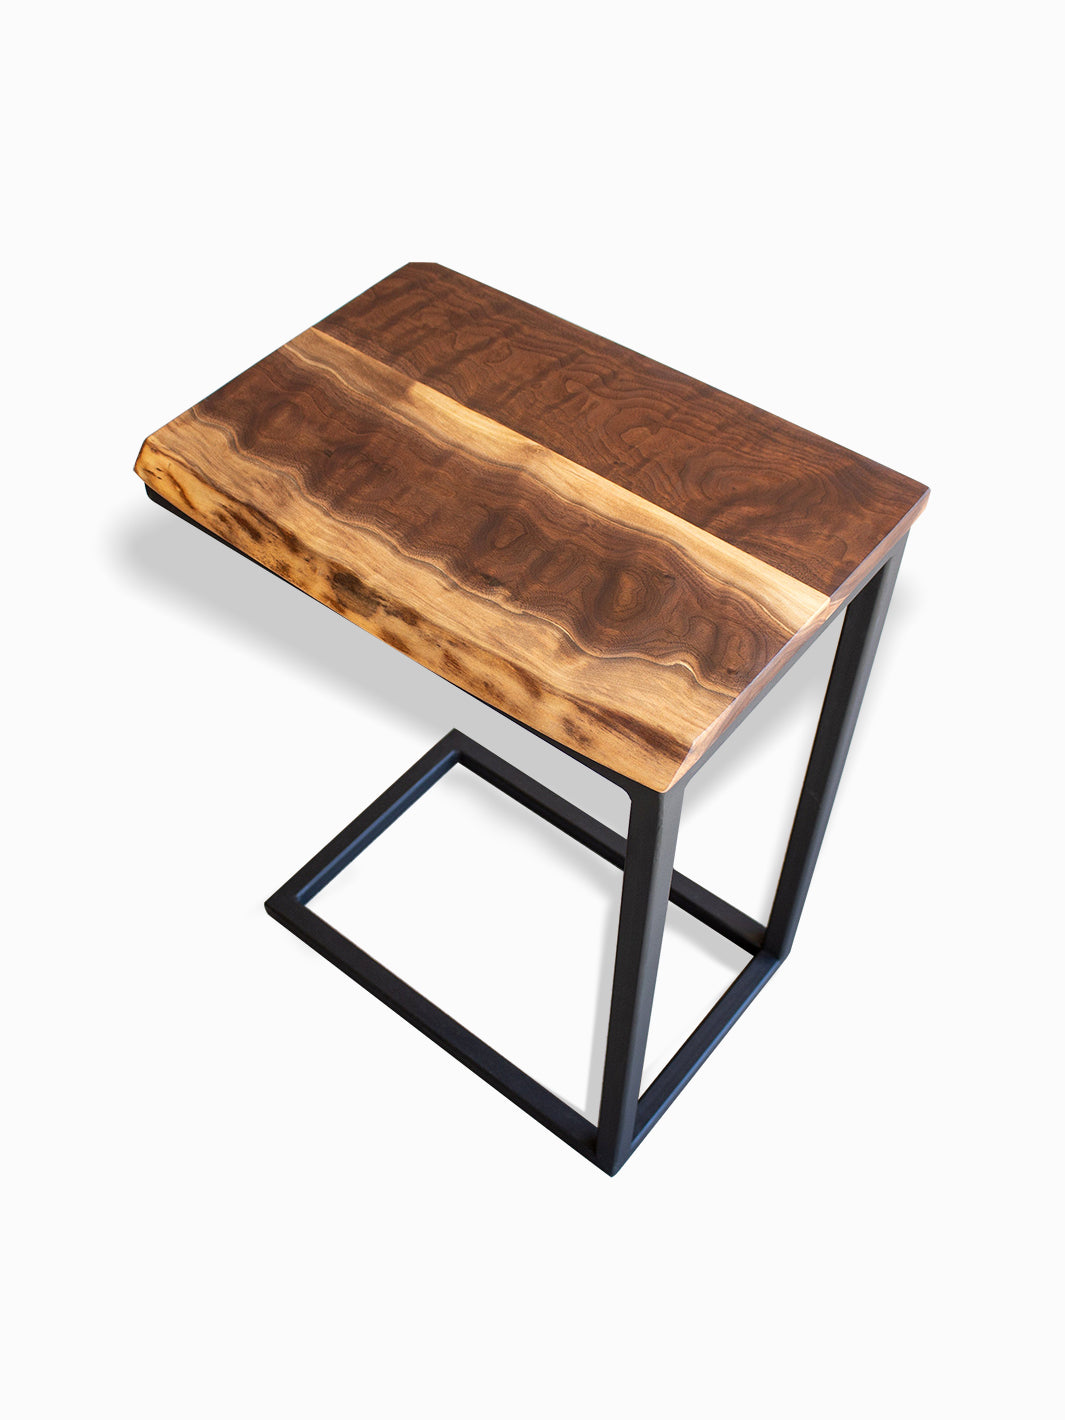 Live Edge Walnut Industrial Side C Table Earthly Comfort Side Tables 499-1